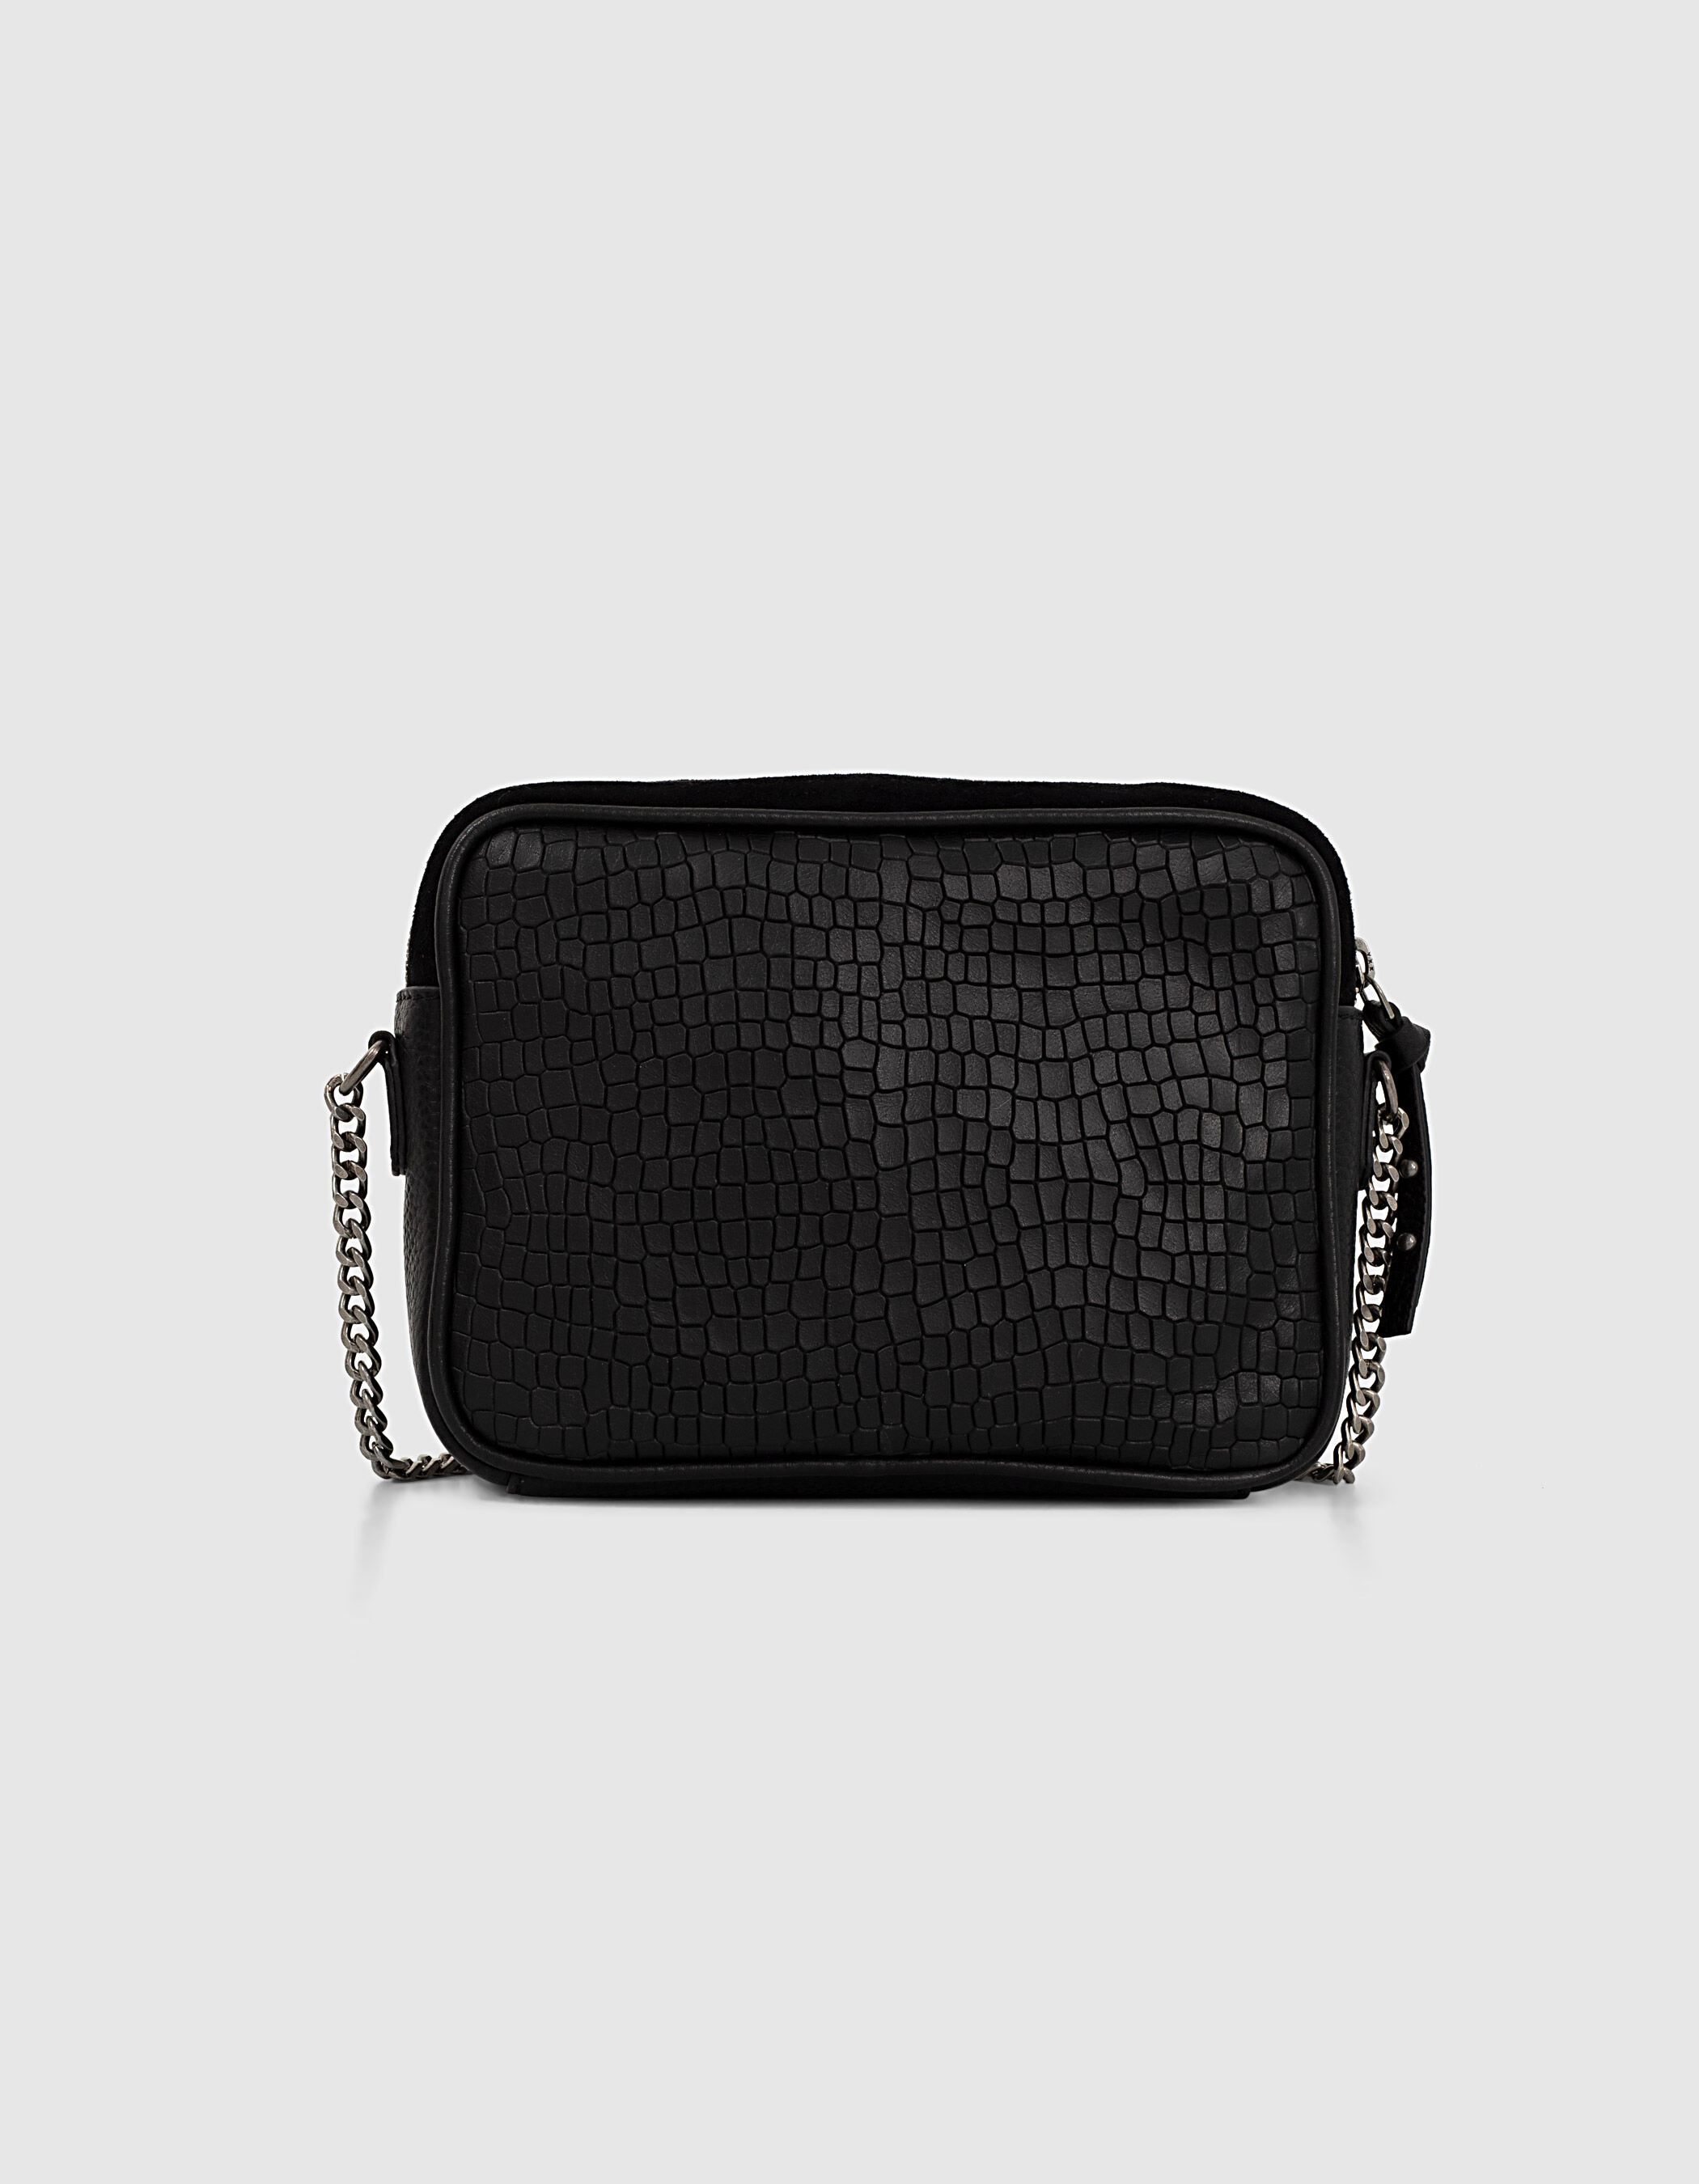 Women's The Lover black python and pony-look boxy bag